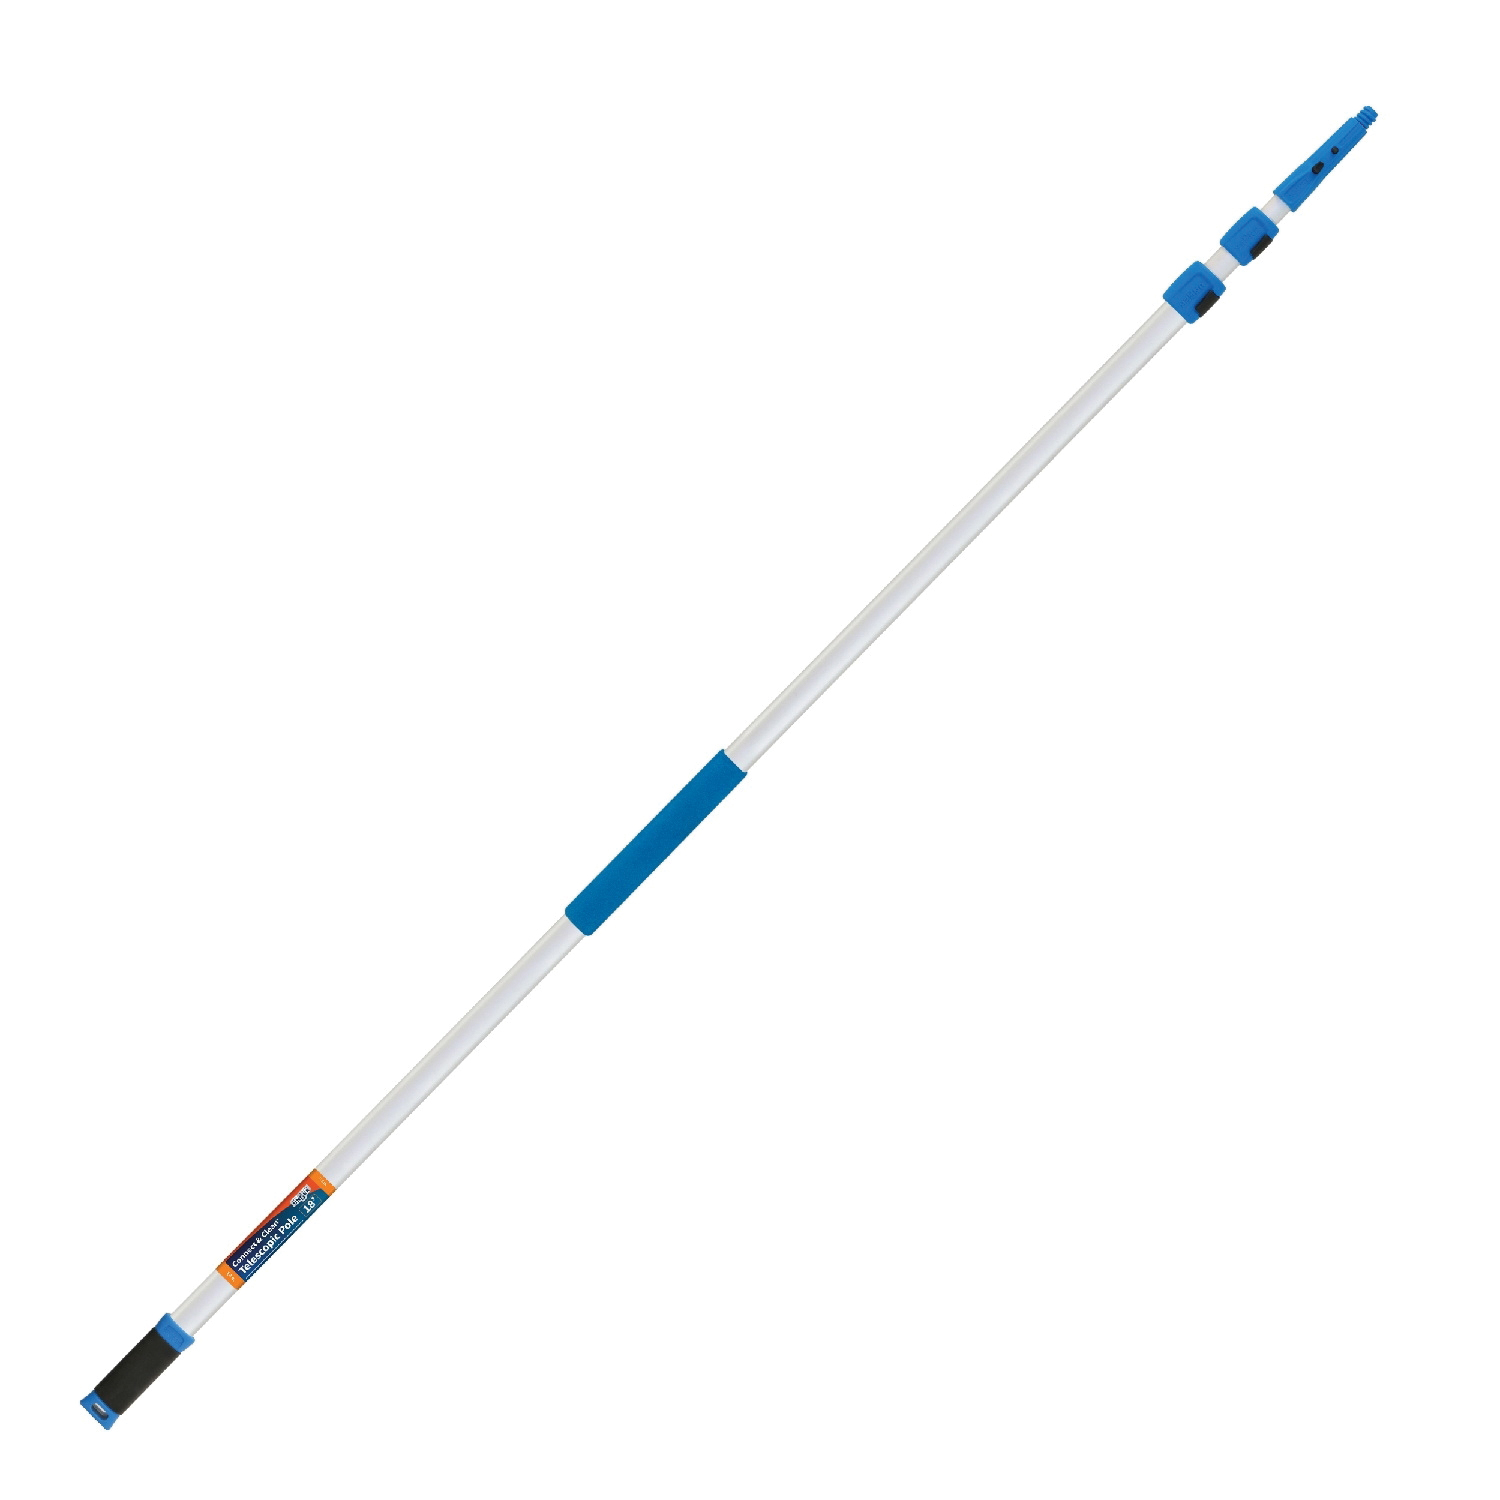 972960 Telescopic Pole with Locking Cone and Quick-Flip Clamps, 6 ft Min Pole L, 18 ft Max Pole L